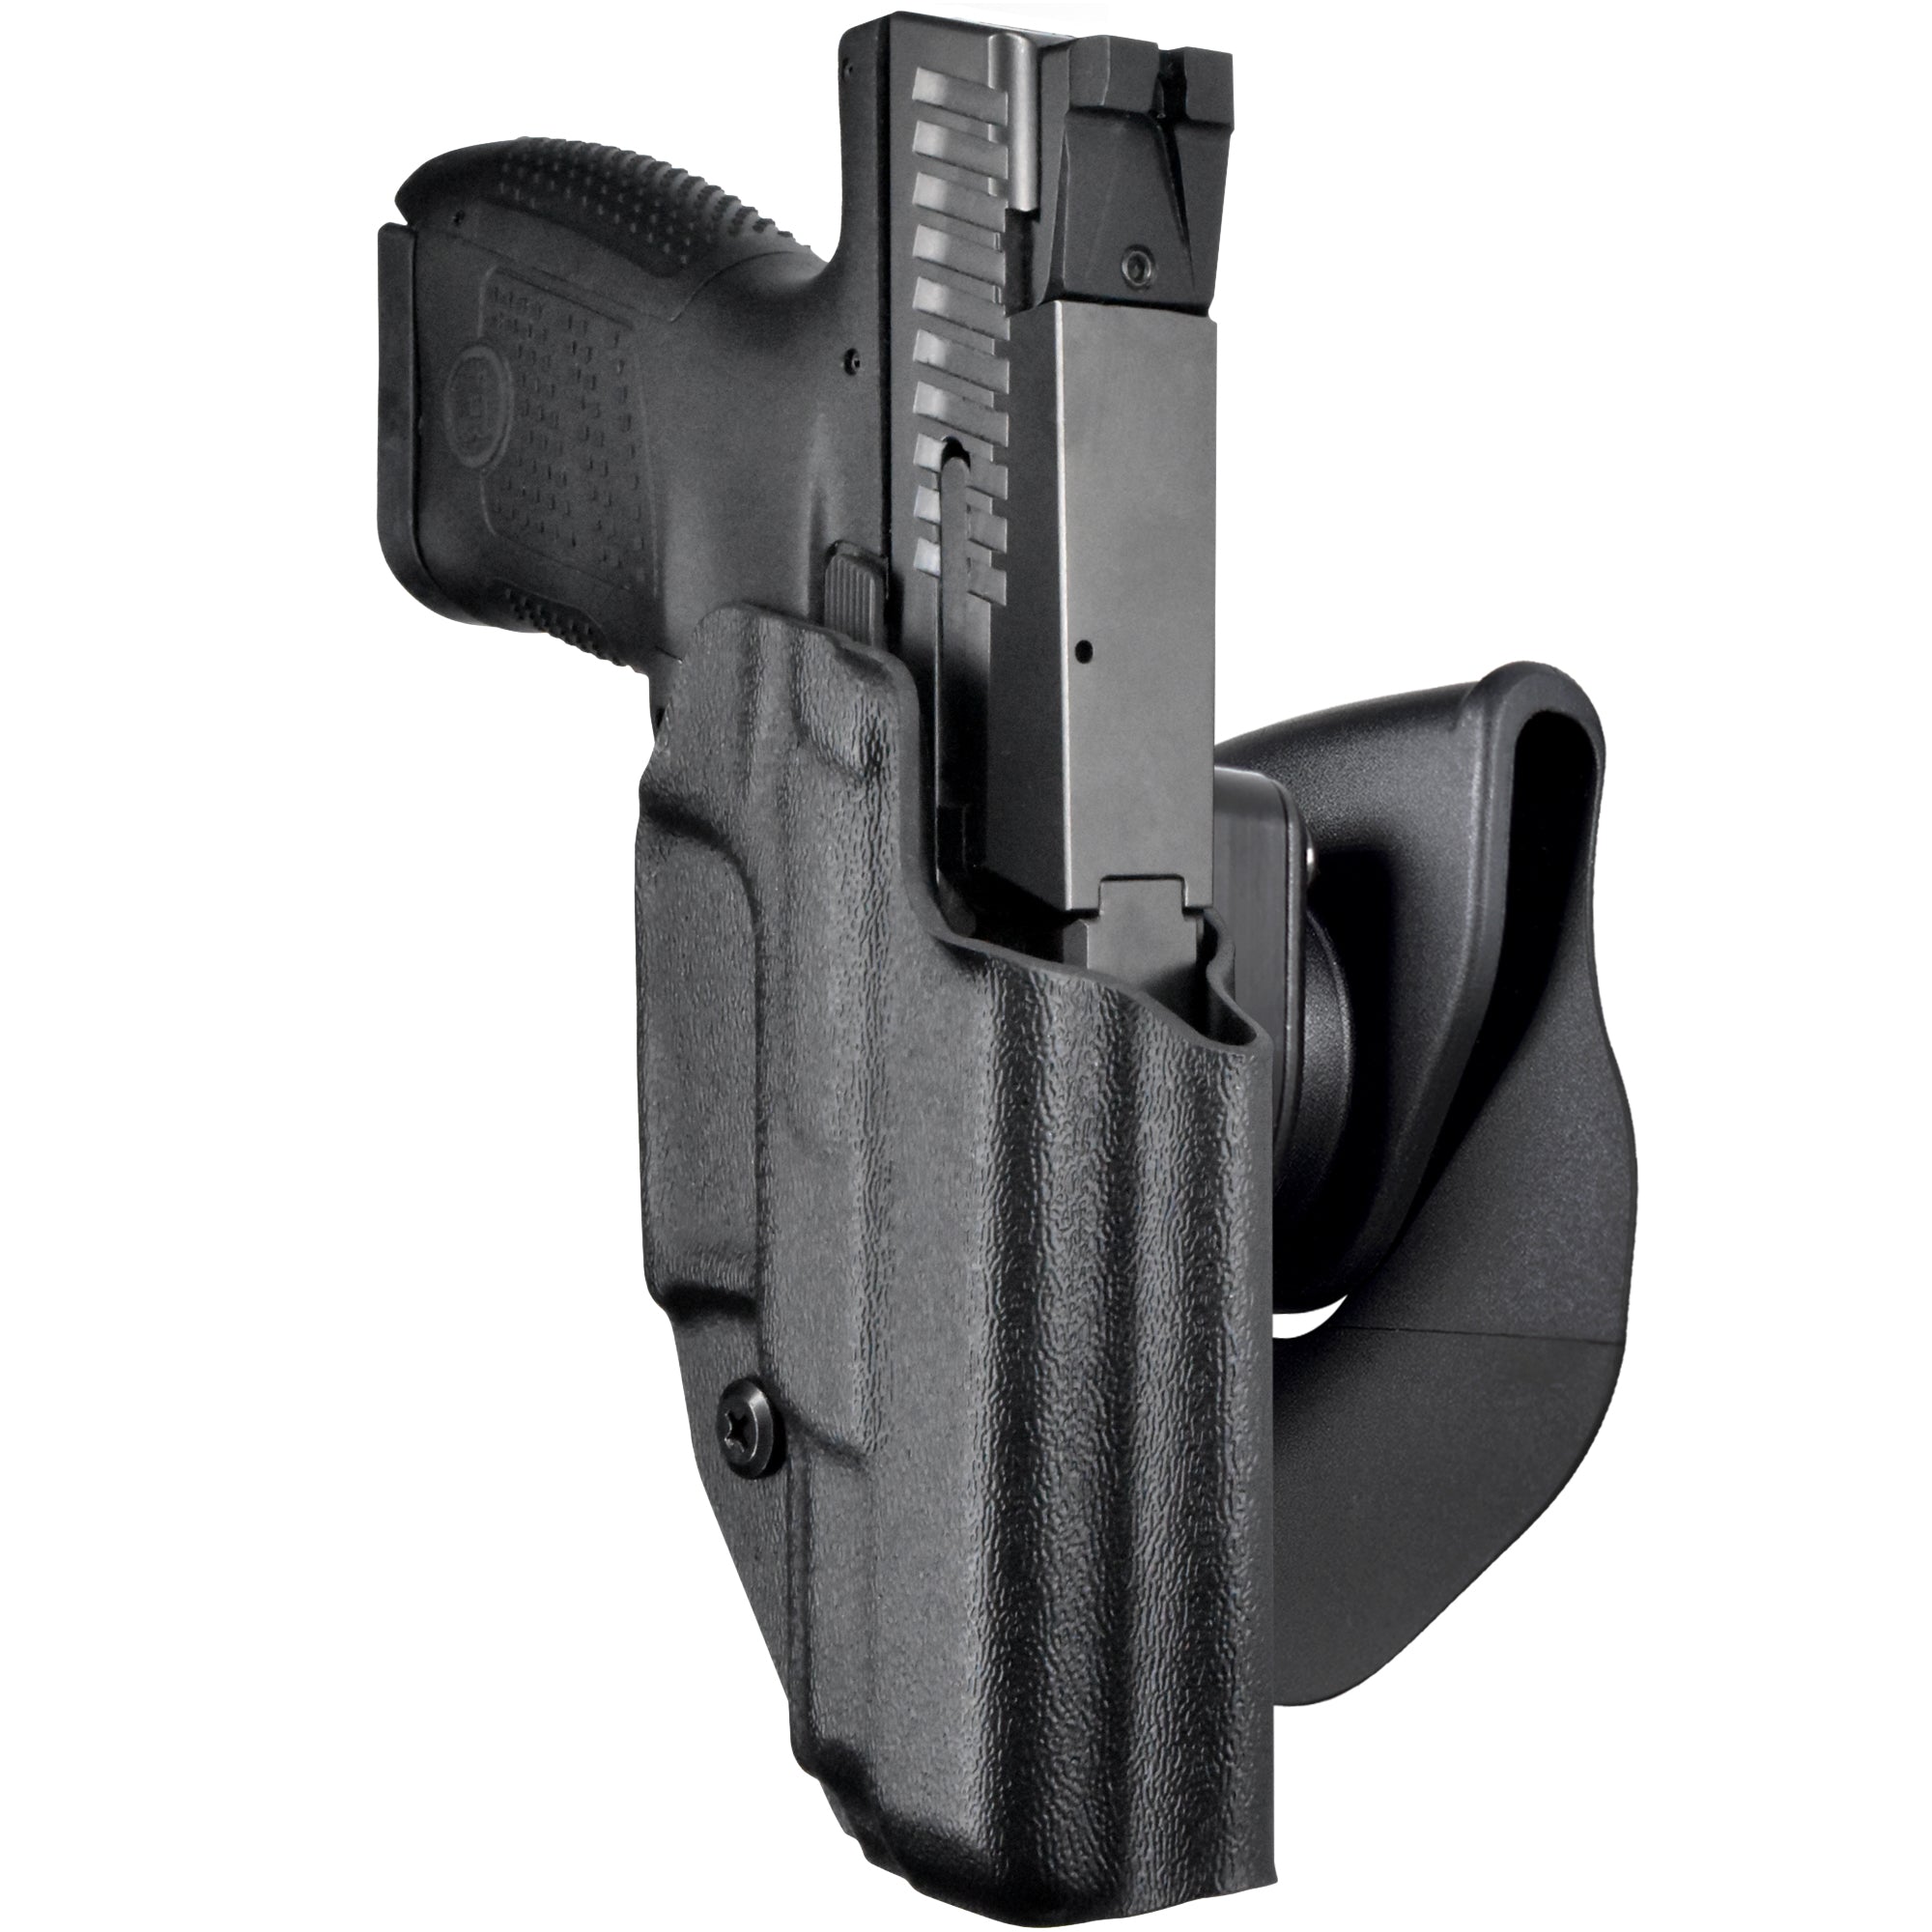 CZ P-10 S Quick Release Paddle Holster